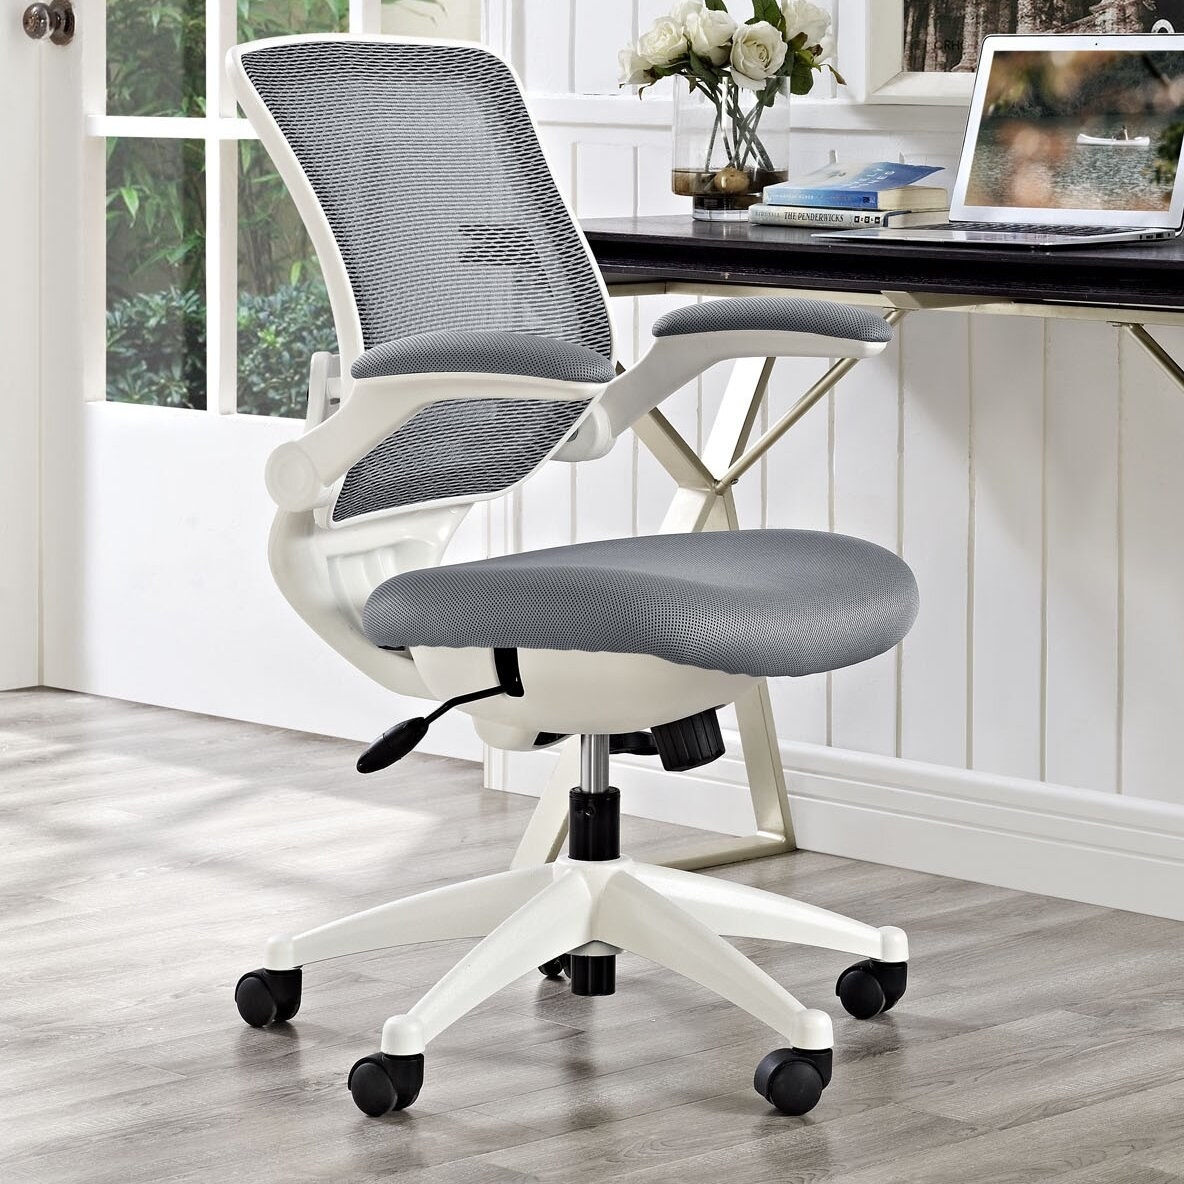 The chair in white and grey with five wheels